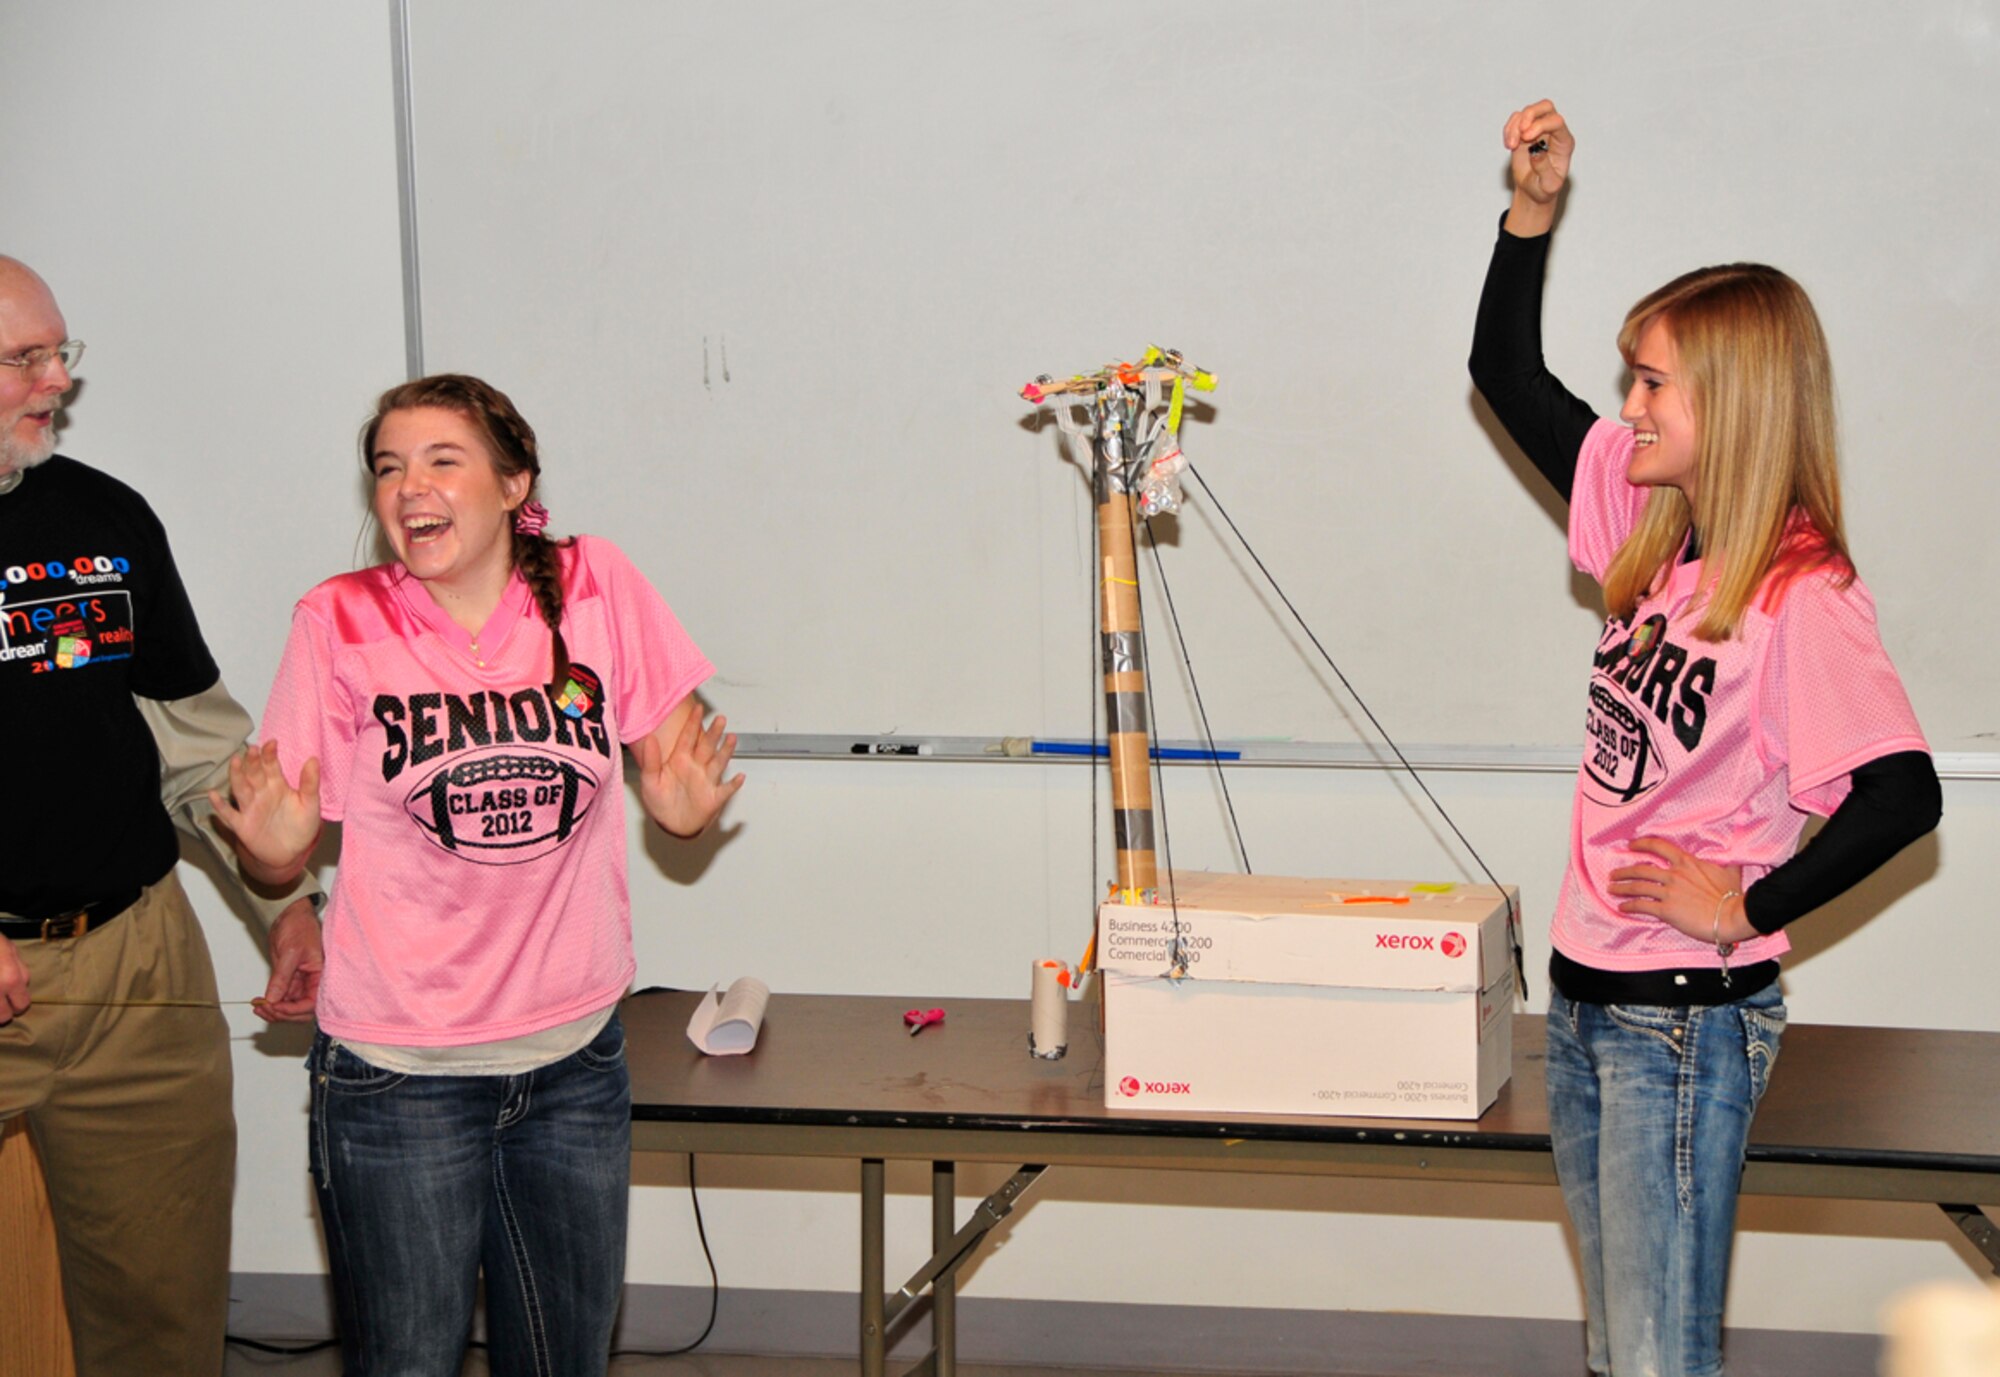 Coffee County Central High School students Lainey Wilkins, left, and Brittany Fox celebrate after a successful test of their space elevator at the Student Design Competition held at the Hands-On Science Center Feb. 21. (Photo by Jacqueline Cowan)